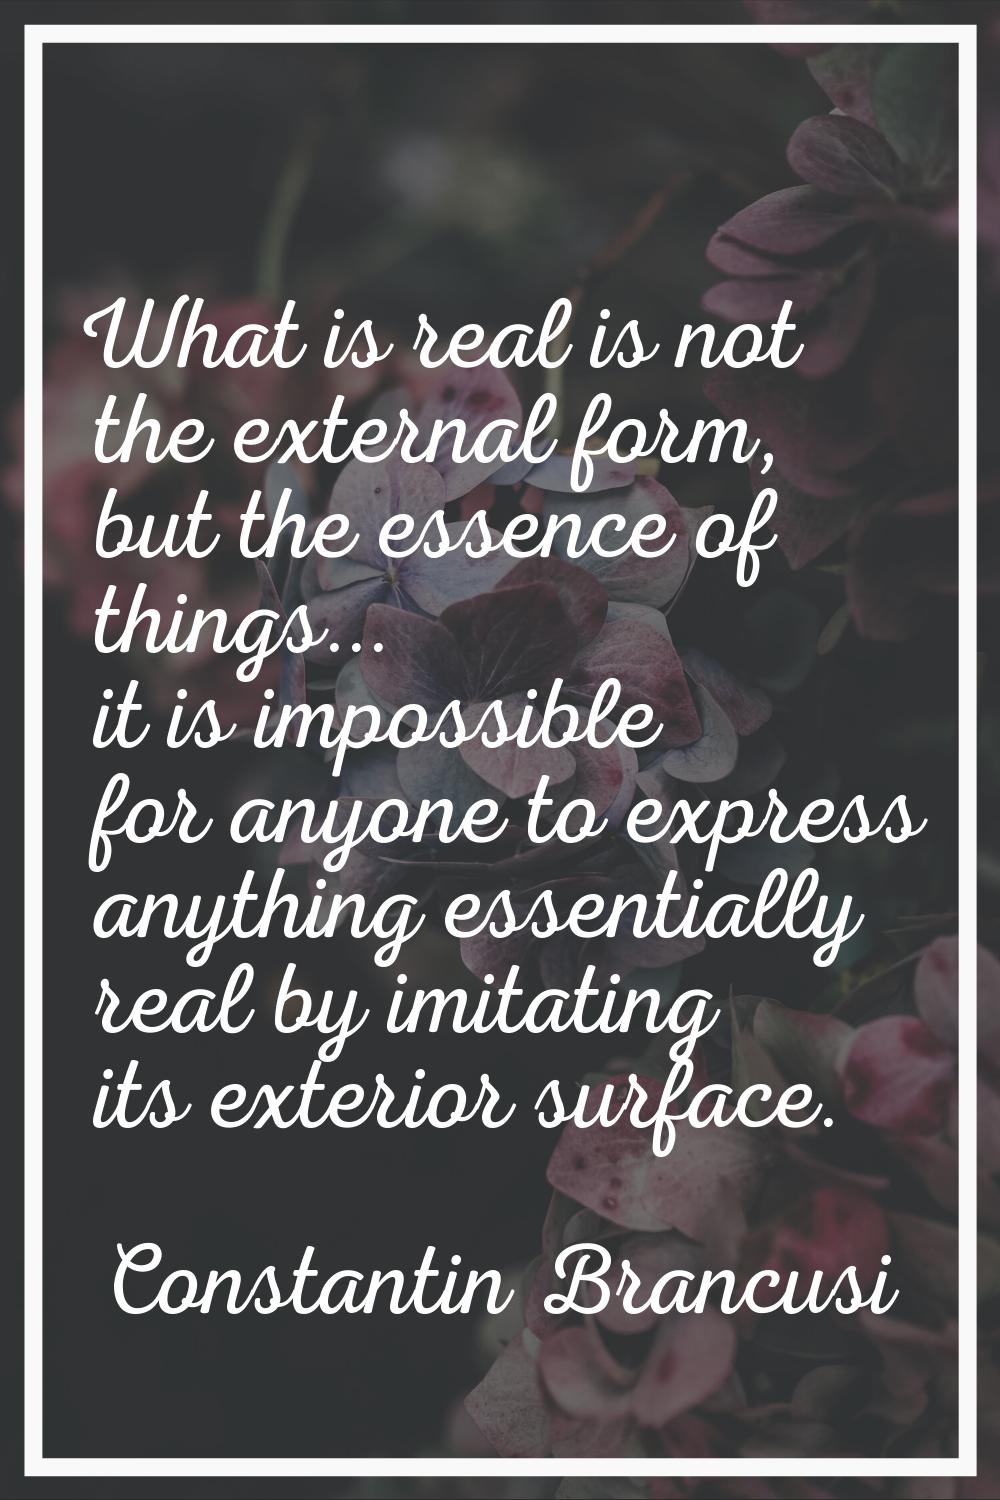 What is real is not the external form, but the essence of things... it is impossible for anyone to 